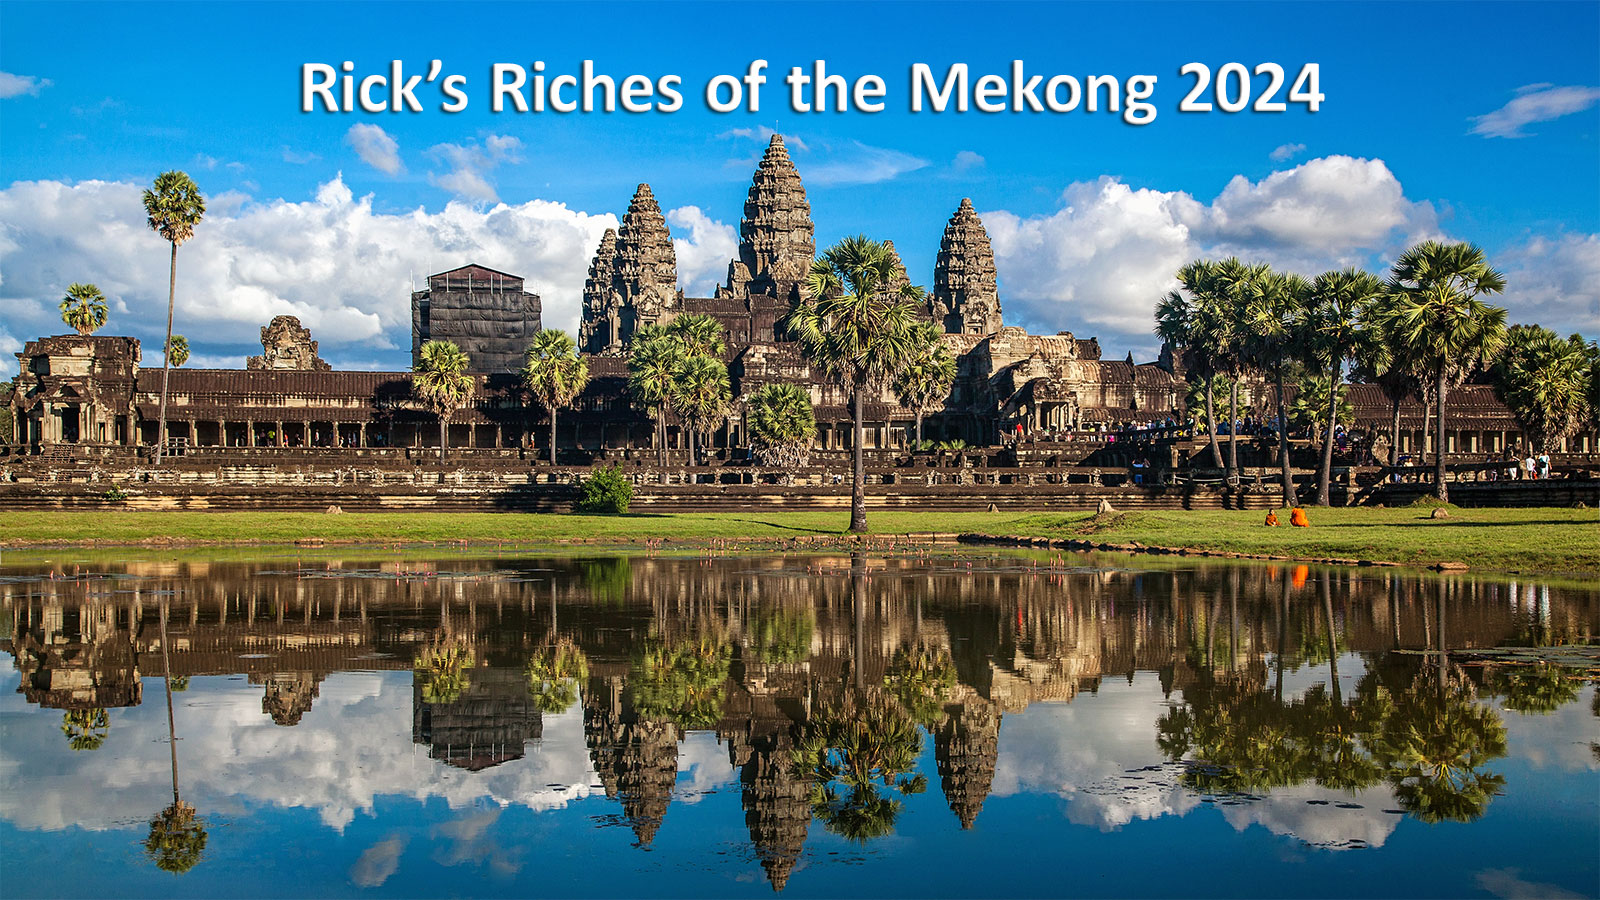 Rick's Riches of the Mekong